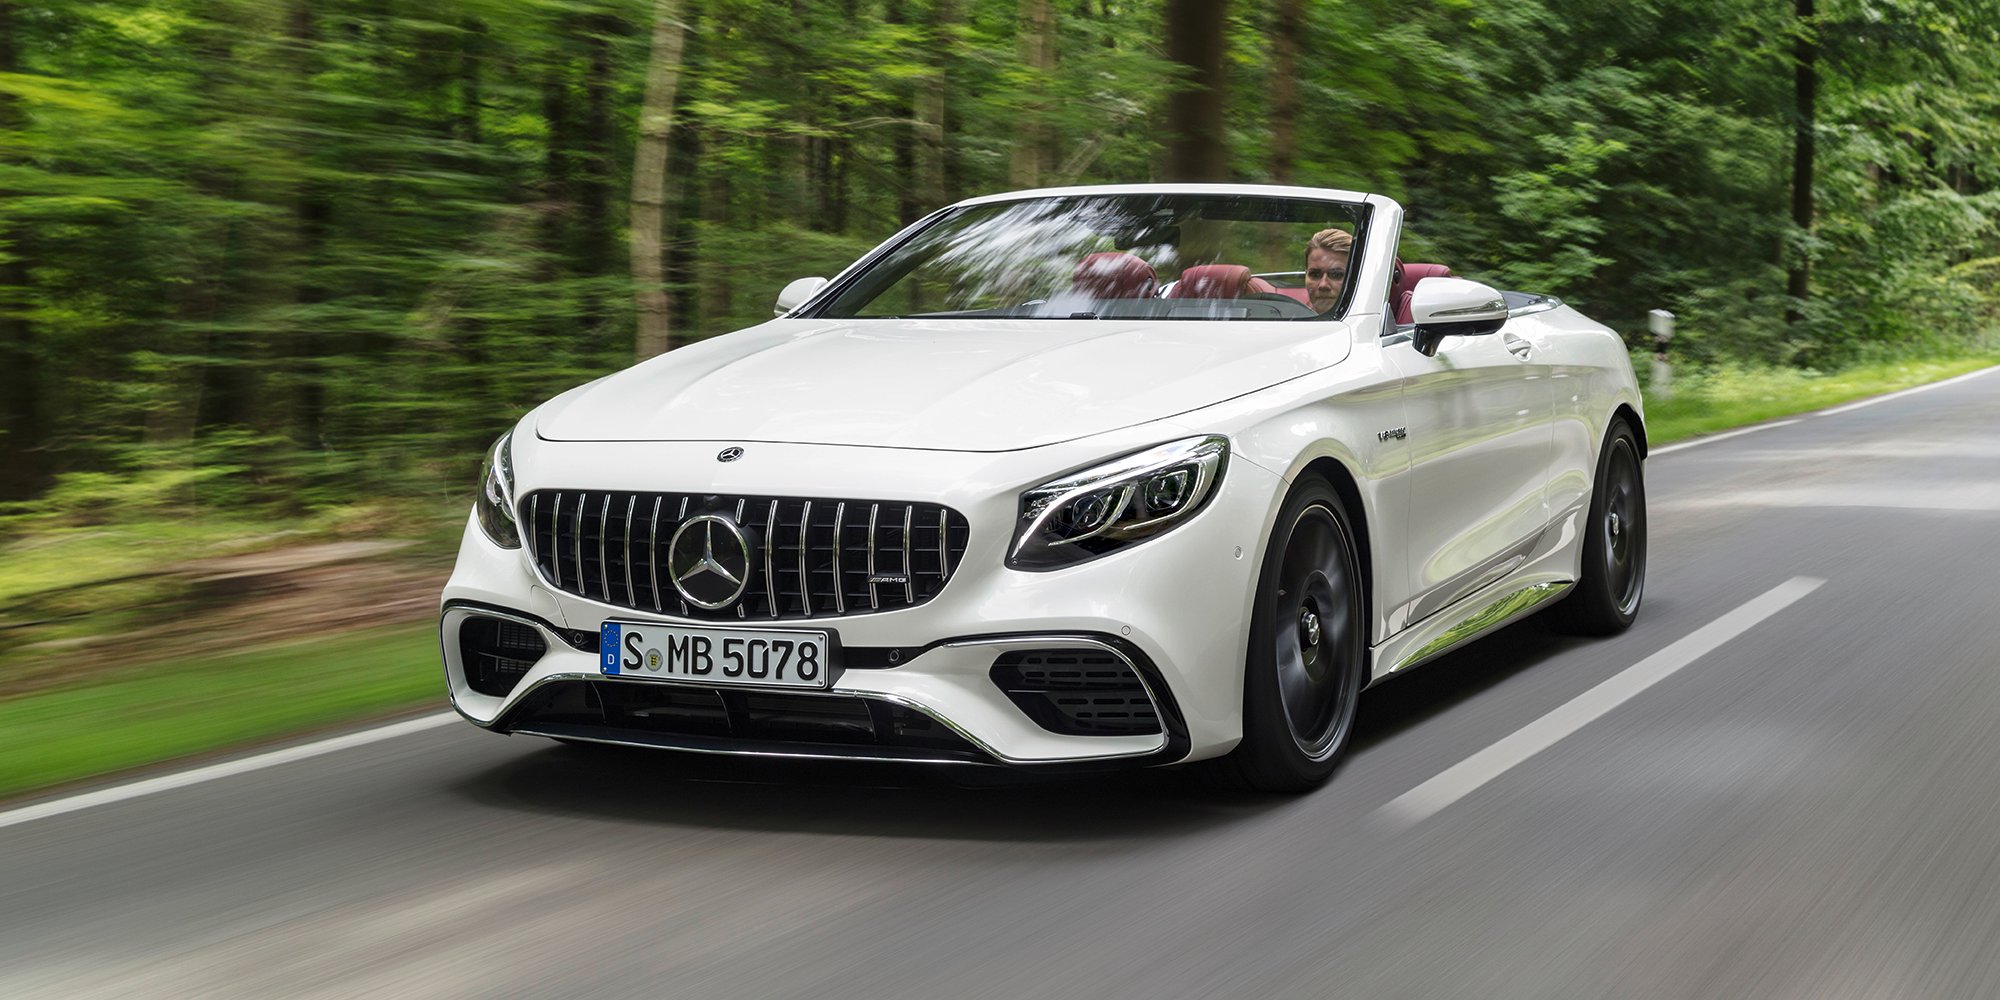 2018 Mercedes-Benz S-Class Coupe, Cabriolet revealed: Here ...